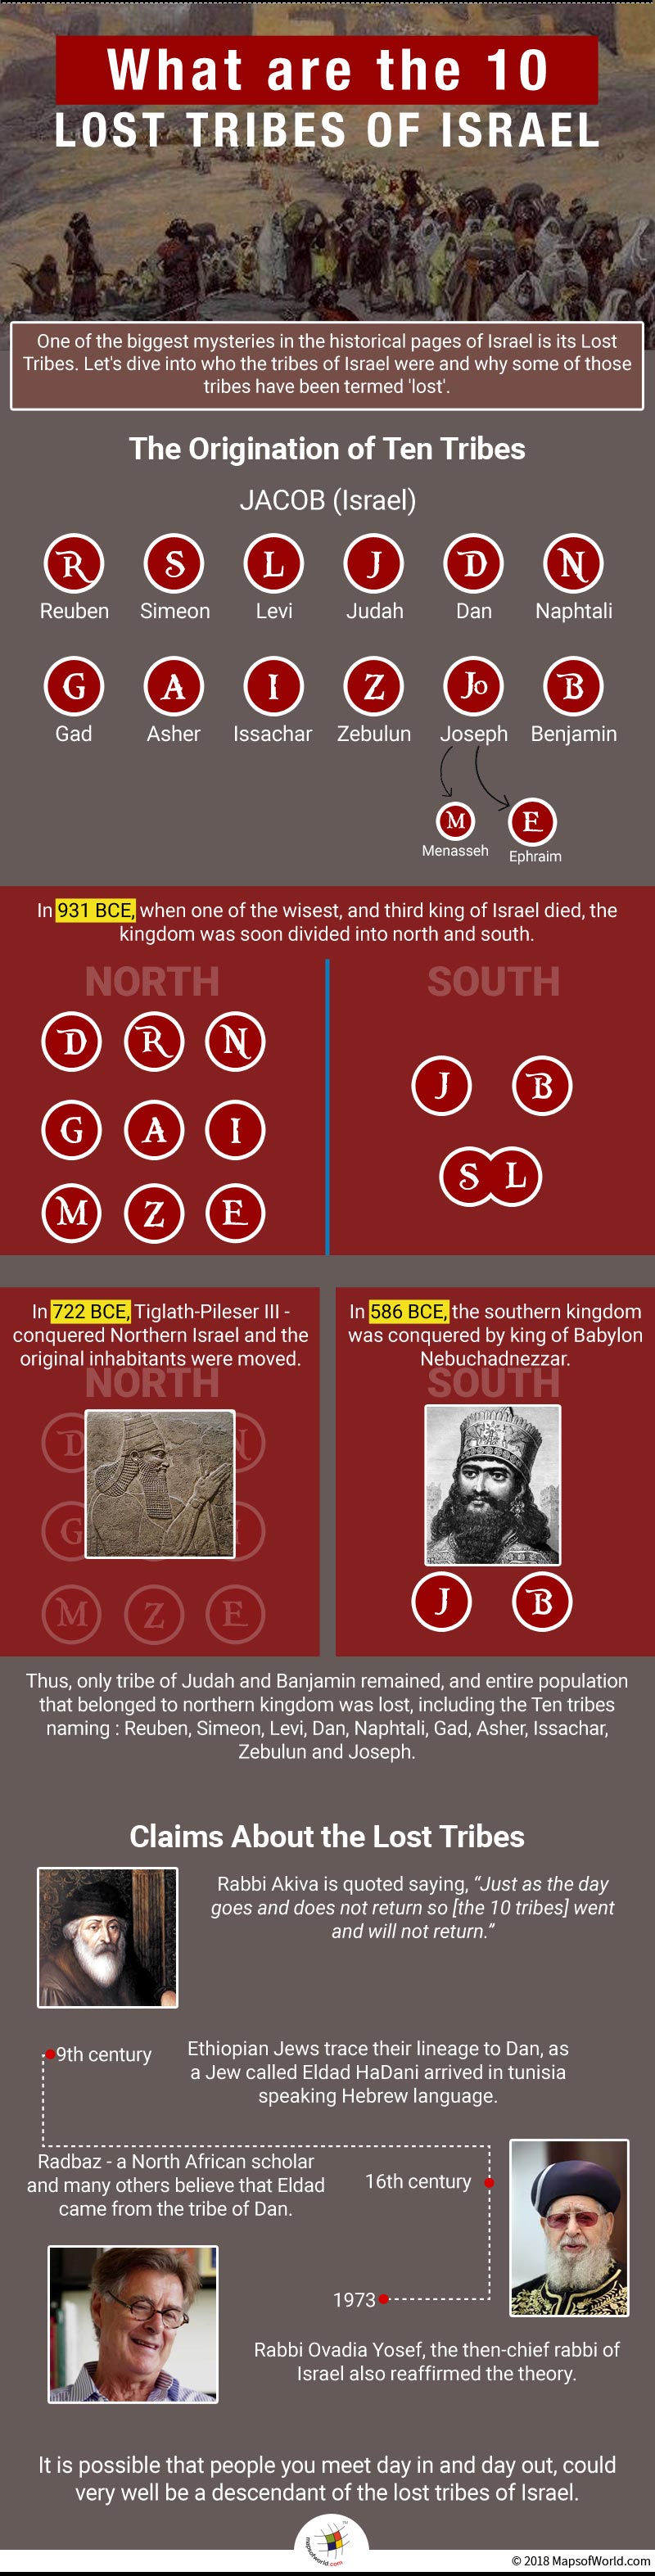 Infographic elaborating aspects of the ten lost tribes of Israel